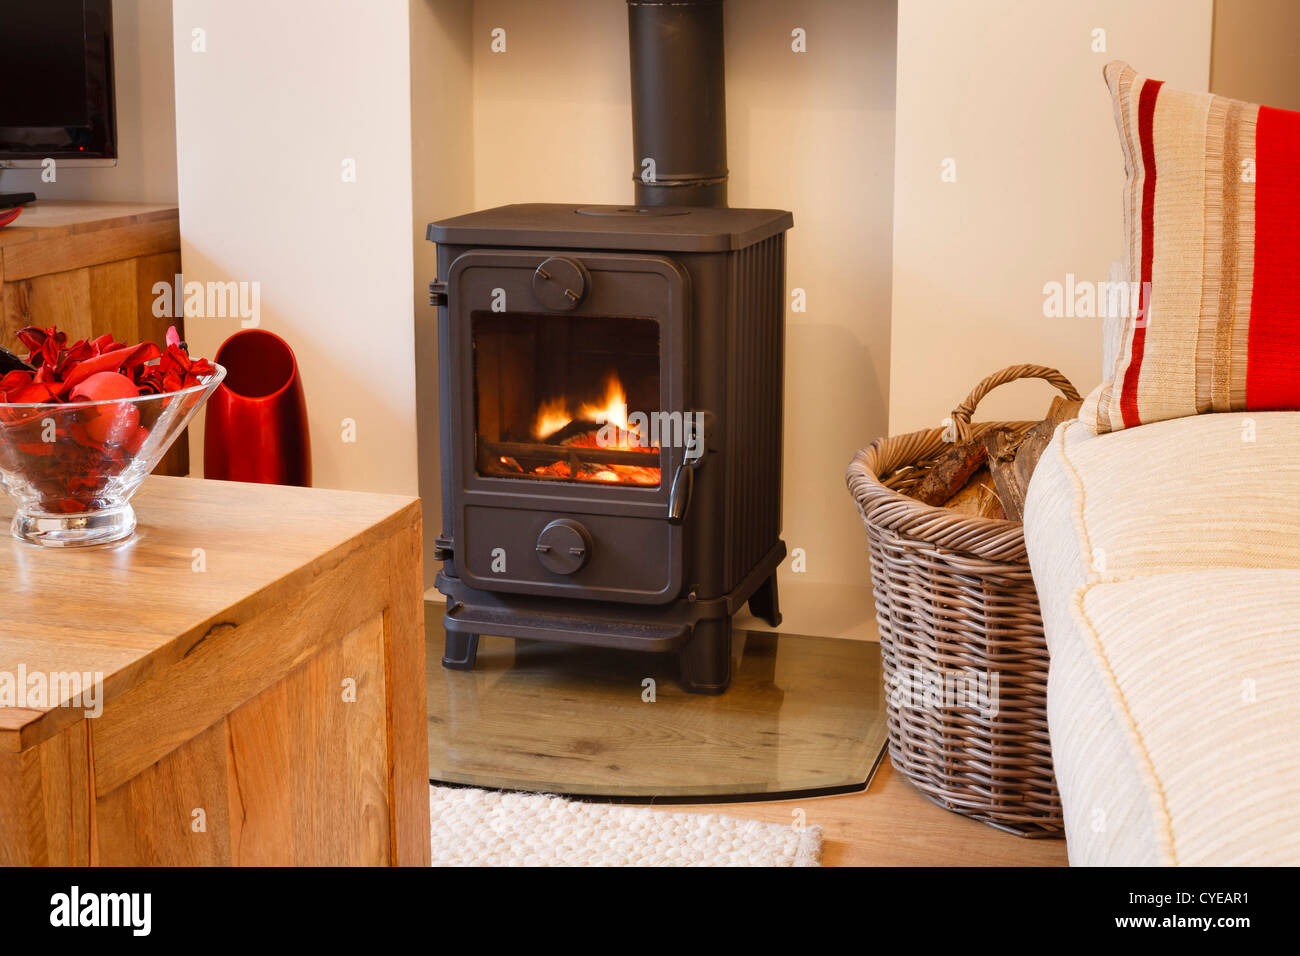 Cozy modern interior living room with wood burner Stock Photo